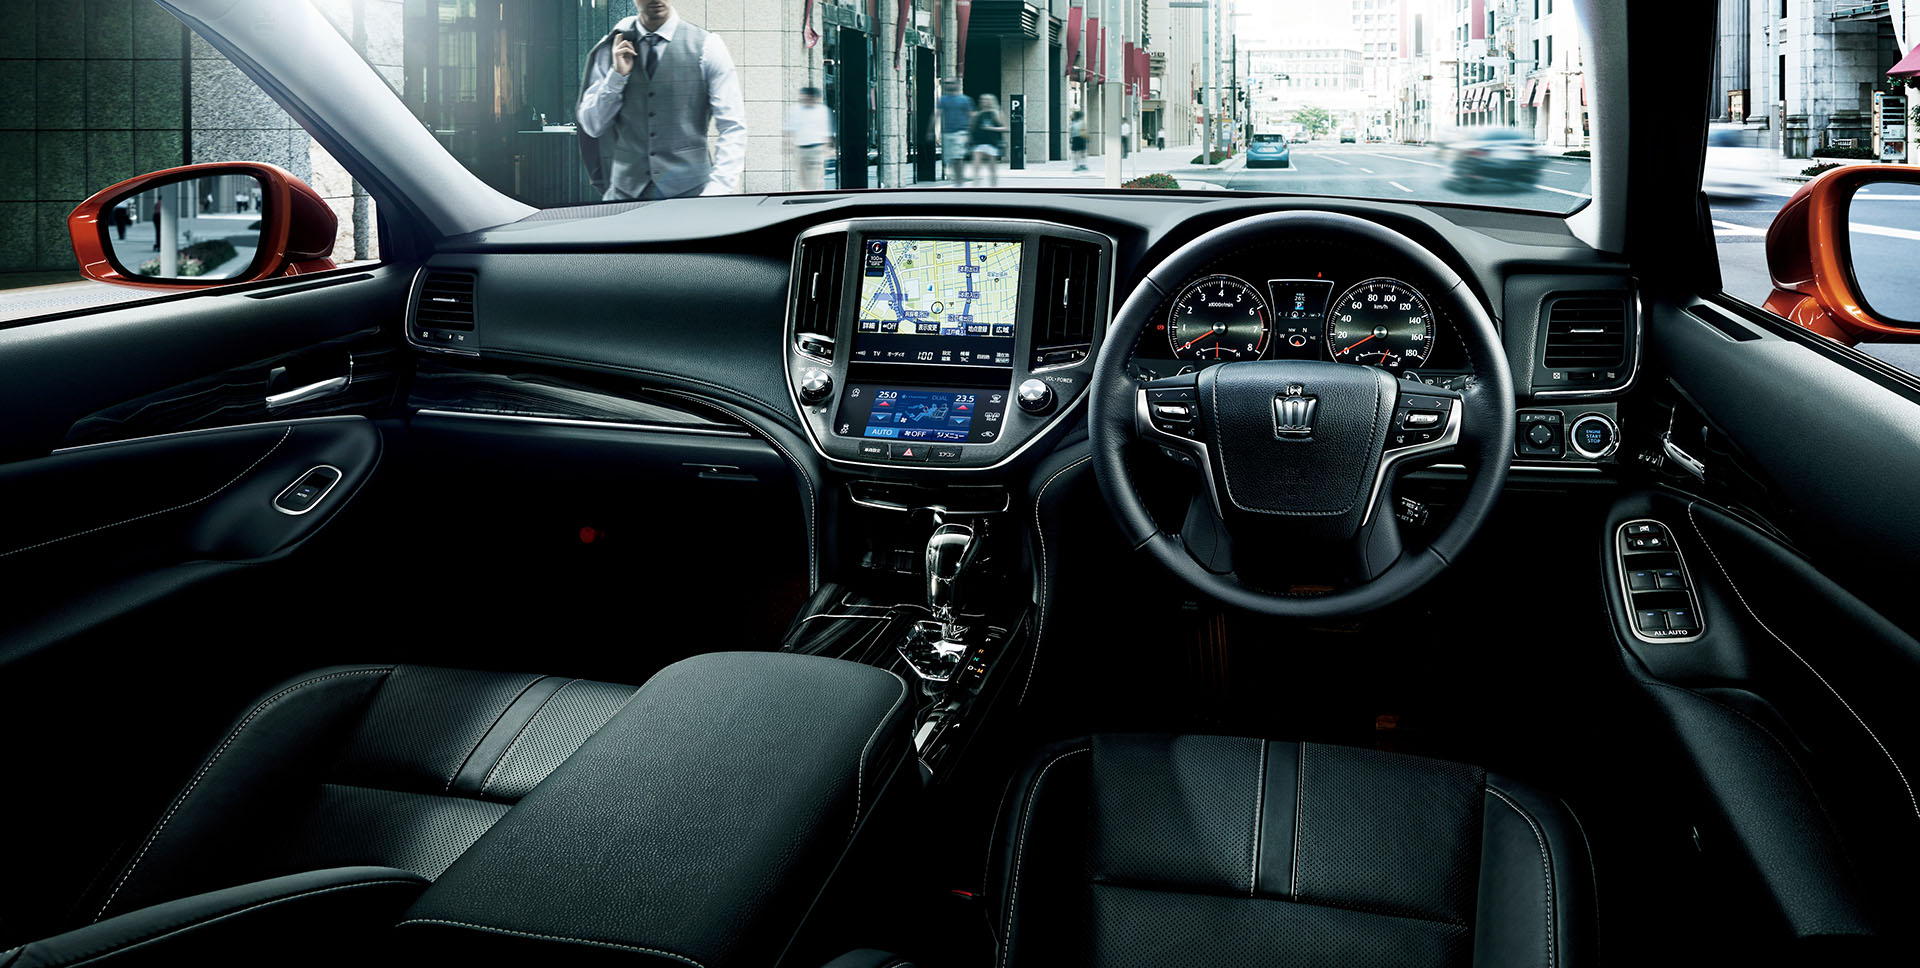 Toyota Crown Athlete interior official